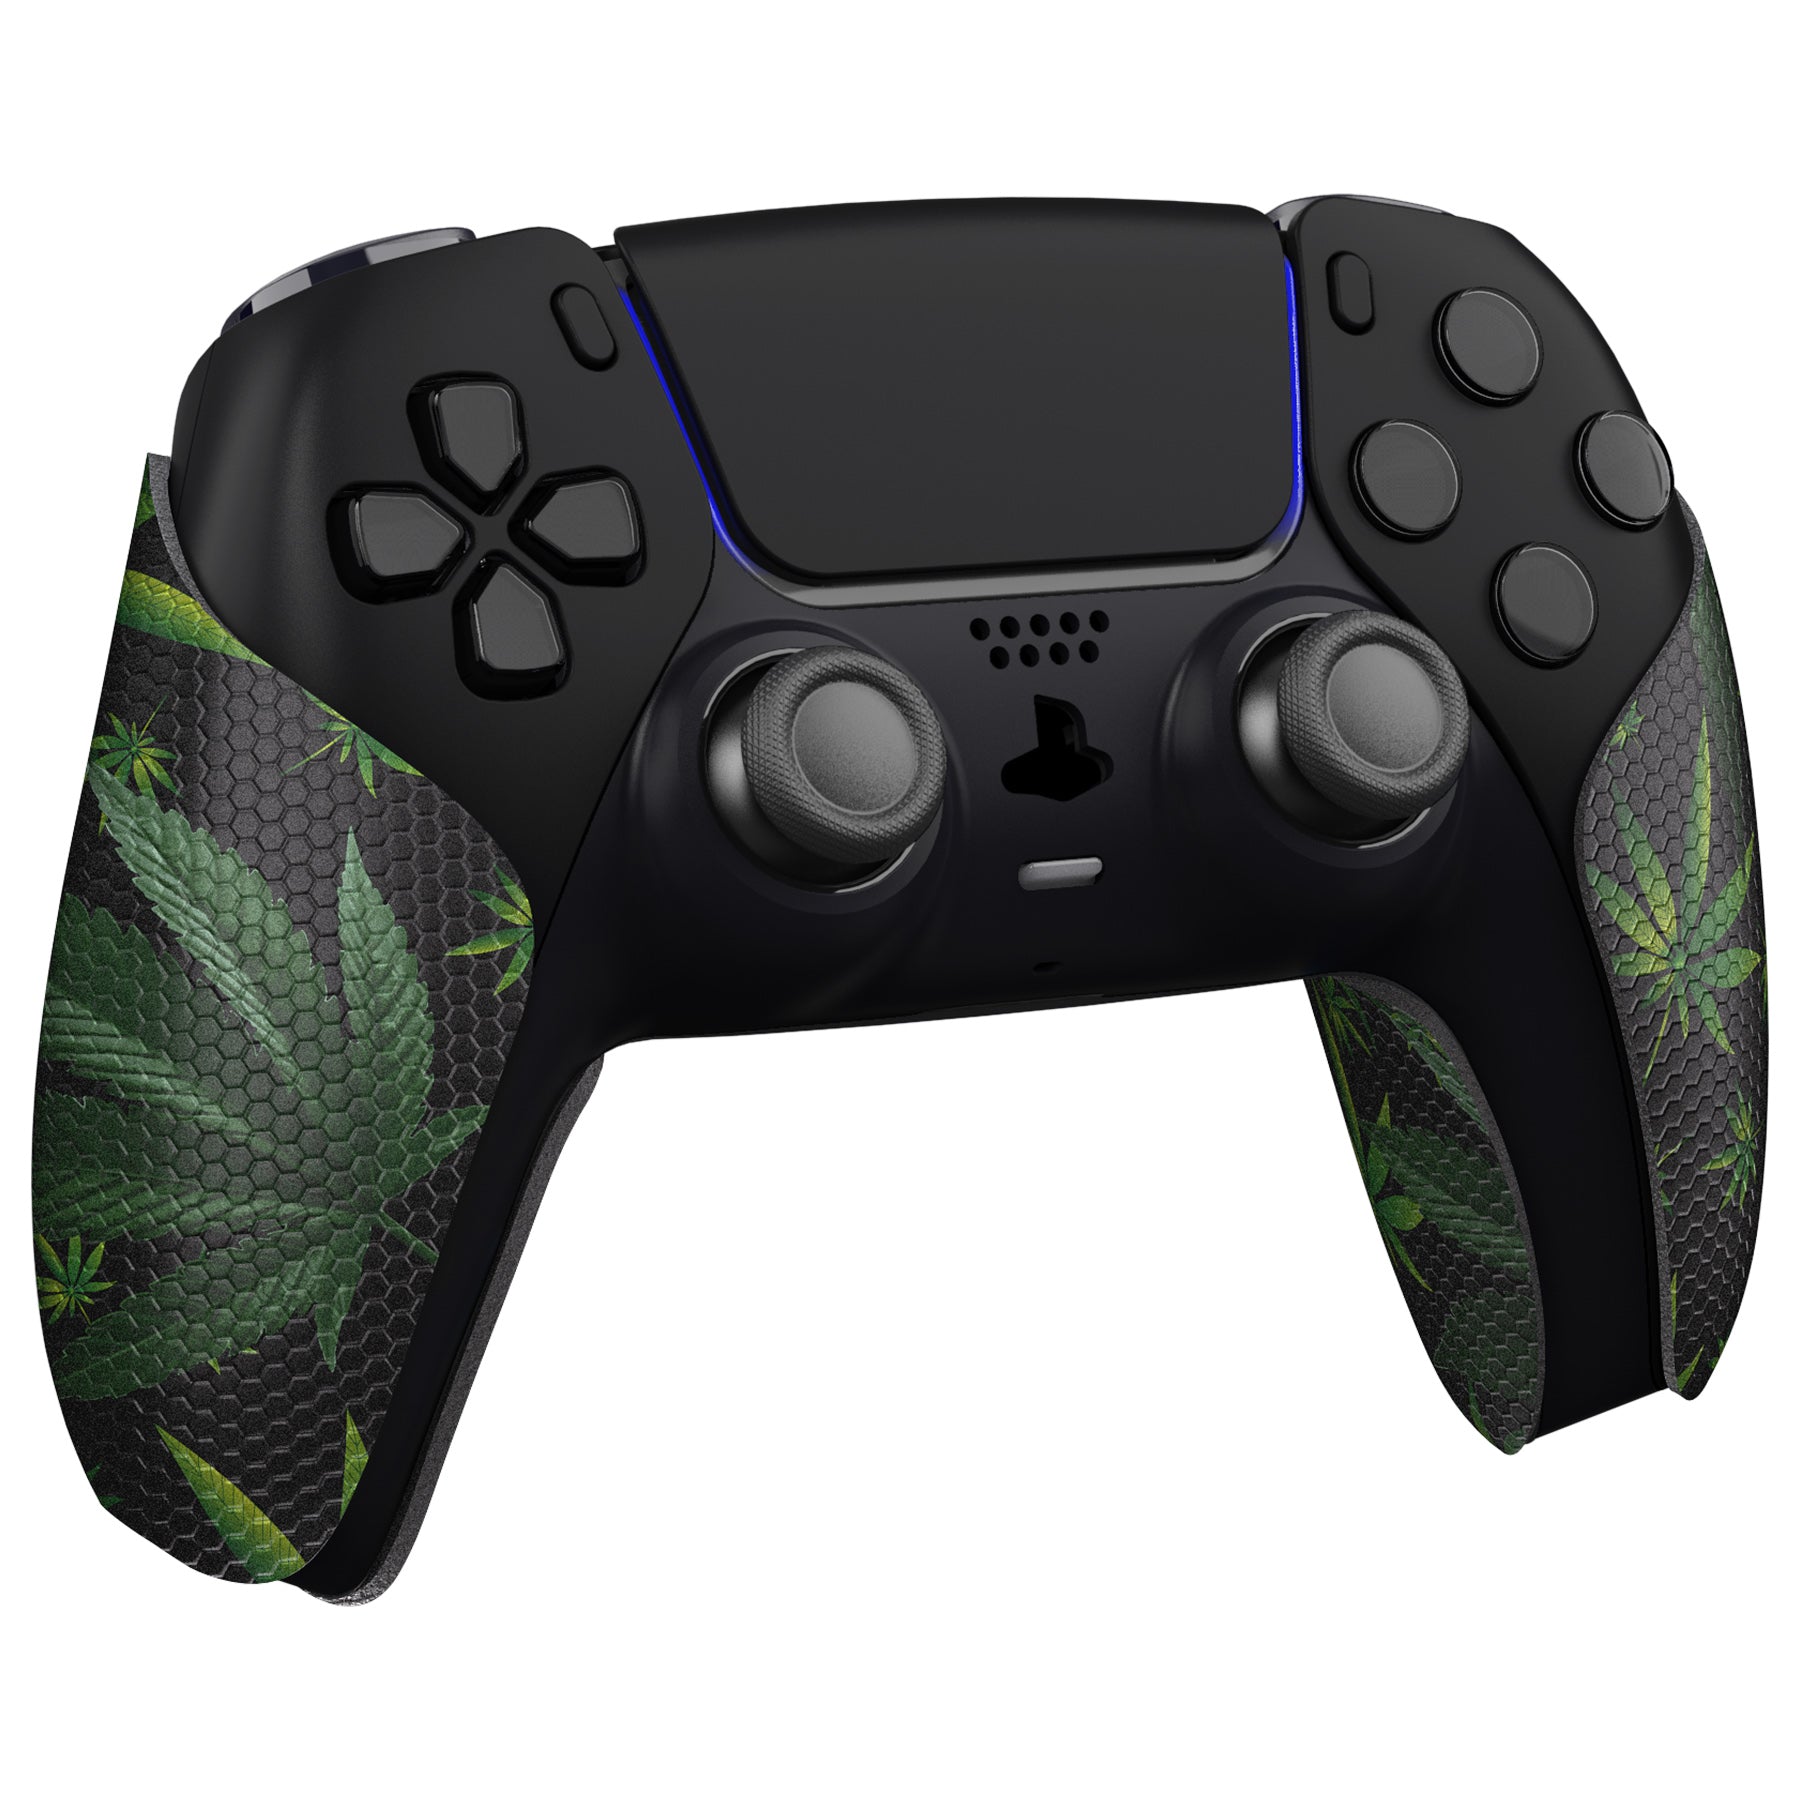 PlayVital Green Weeds Anti-Skid Sweat-Absorbent Controller Grip for PS5 Controller, Professional Textured Soft Rubber Pads Handle Grips for PS5 Controller - PFPJ135 PlayVital